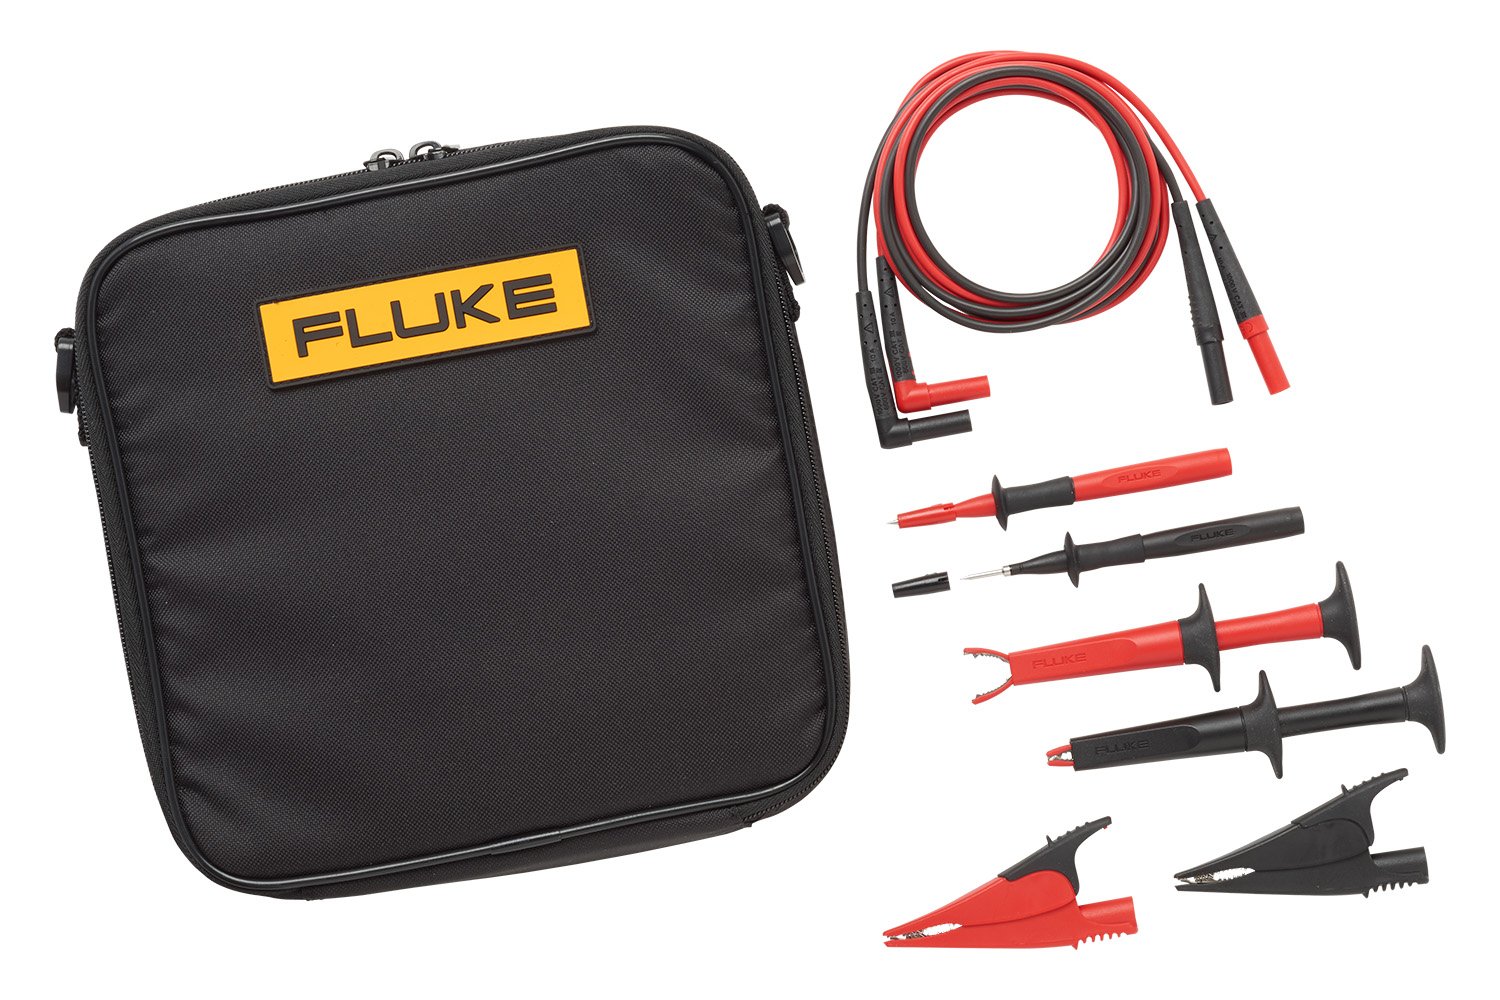 TP220 FLUKE Silicone TL222 Alligator Clips SureGrip Test Probes Replace TL 223 